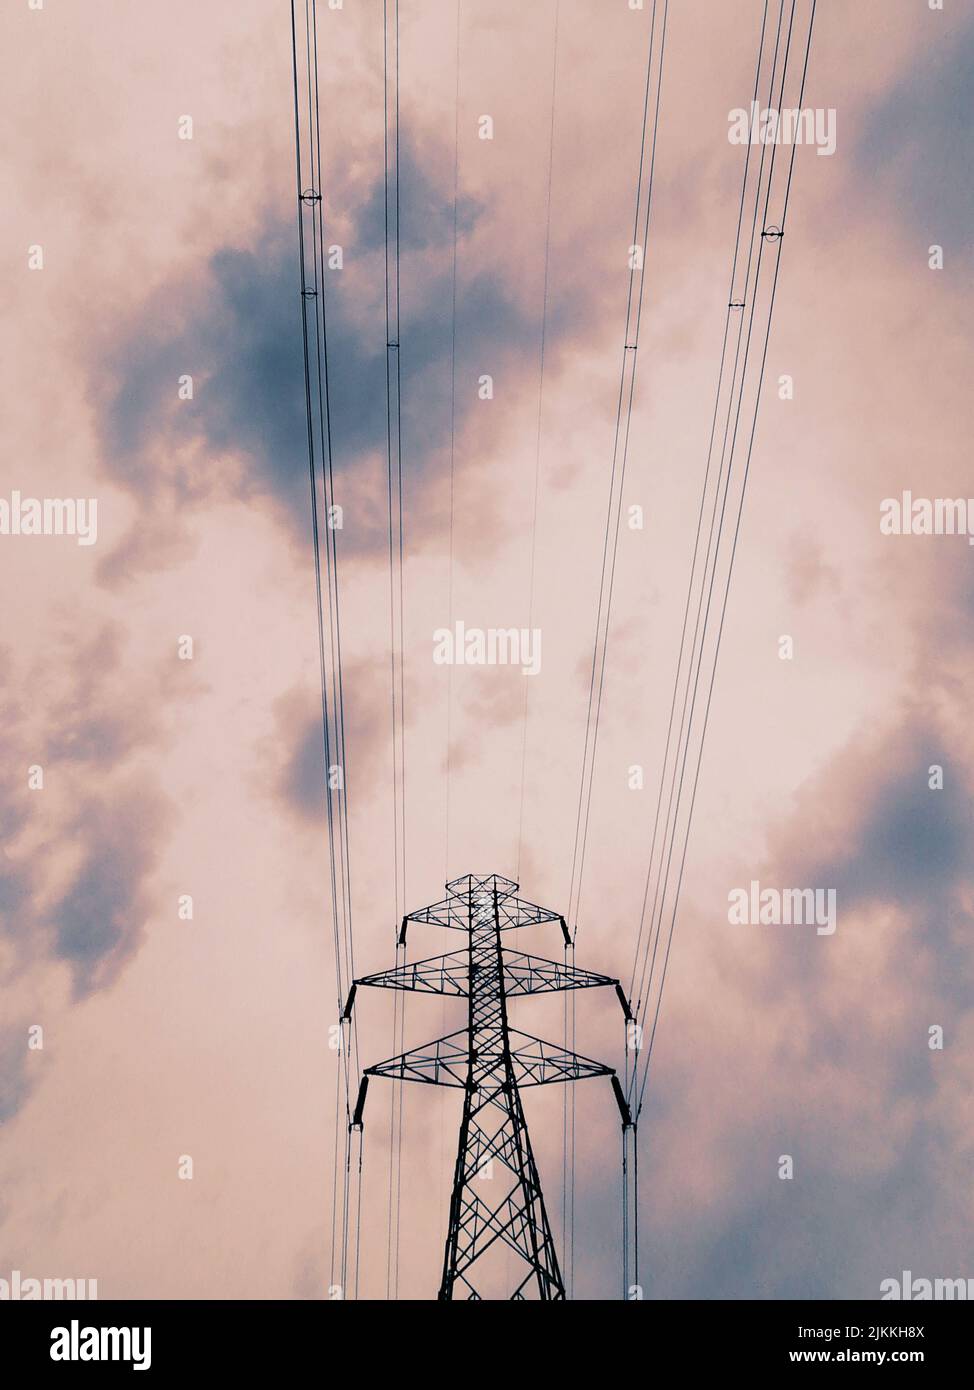 A vertical low angle shot of the electricity transmission lines against a cloudy sky Stock Photo